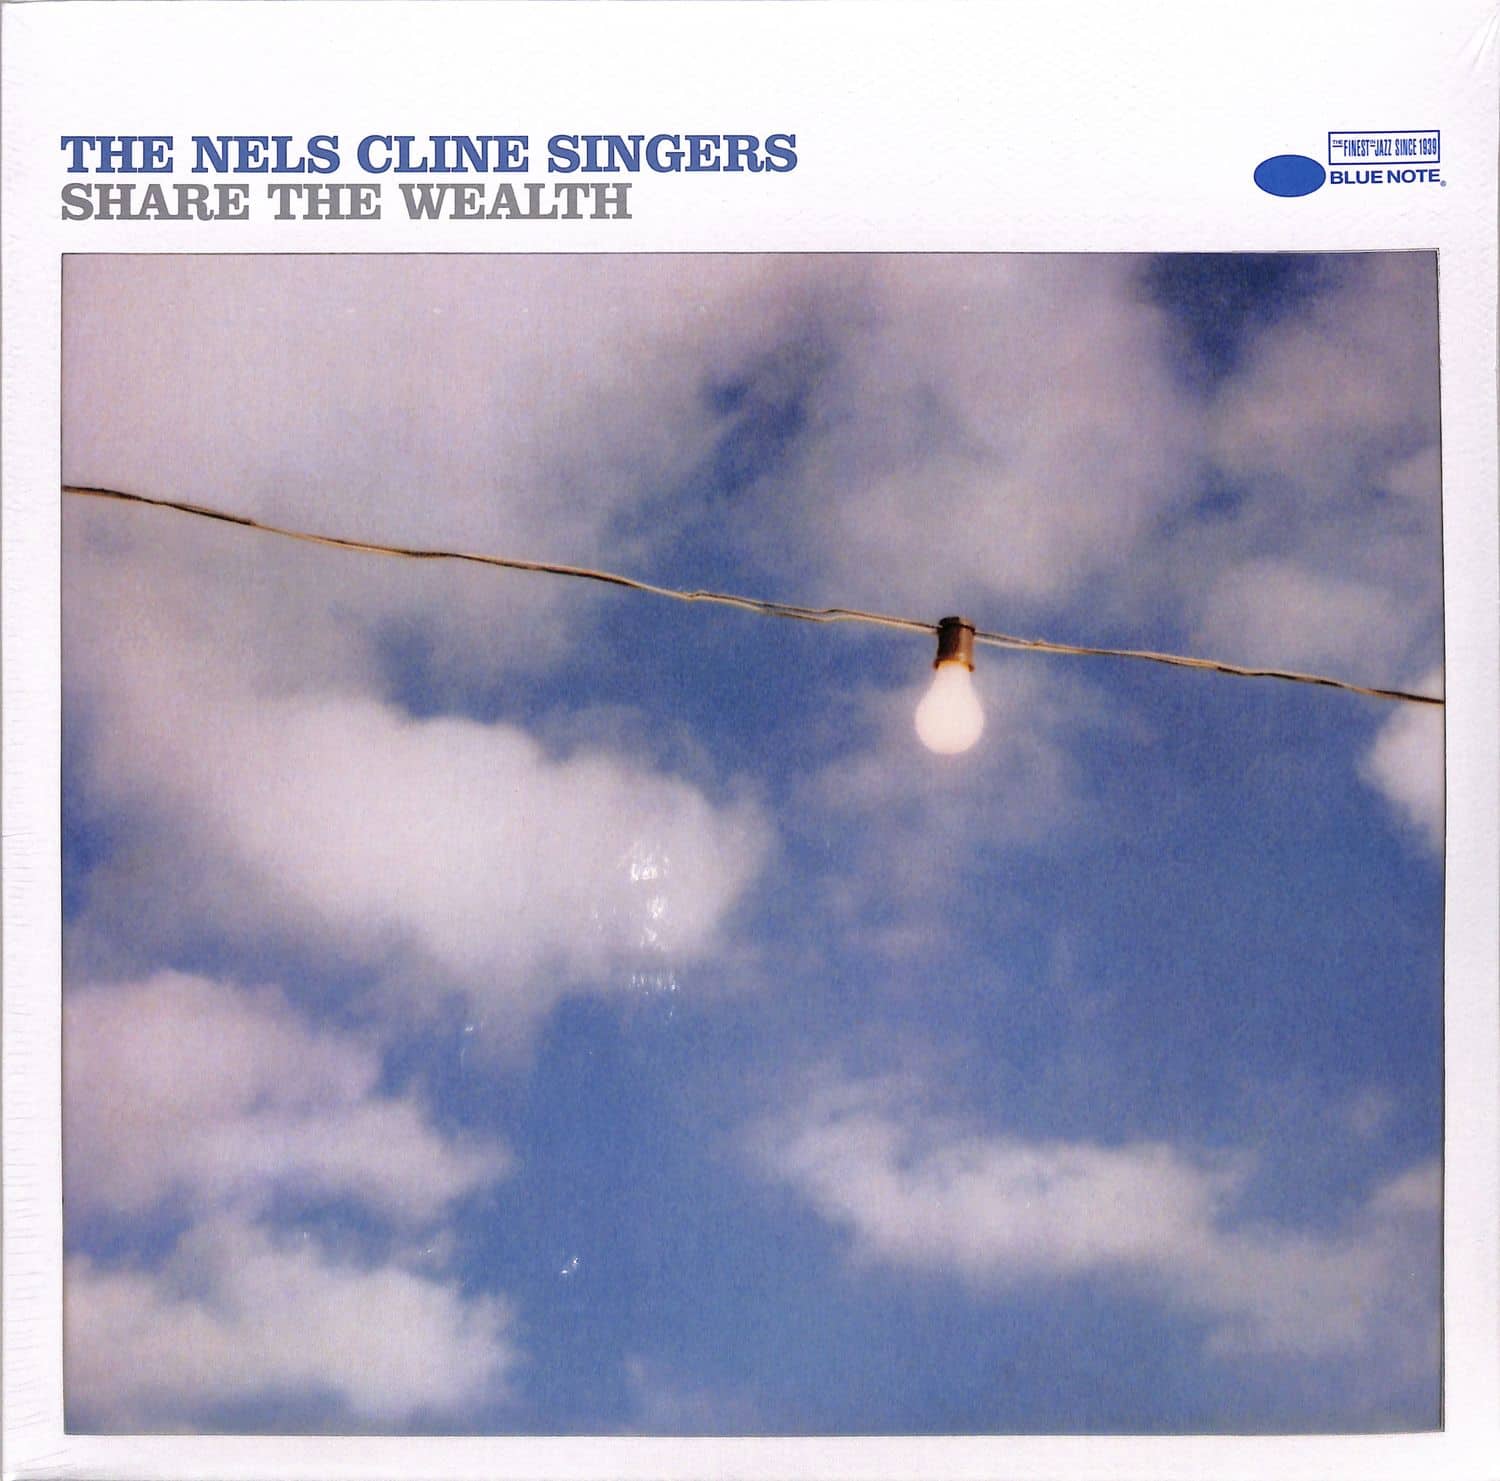 The Nels Cline Singers - SHARE THE WEALTH 